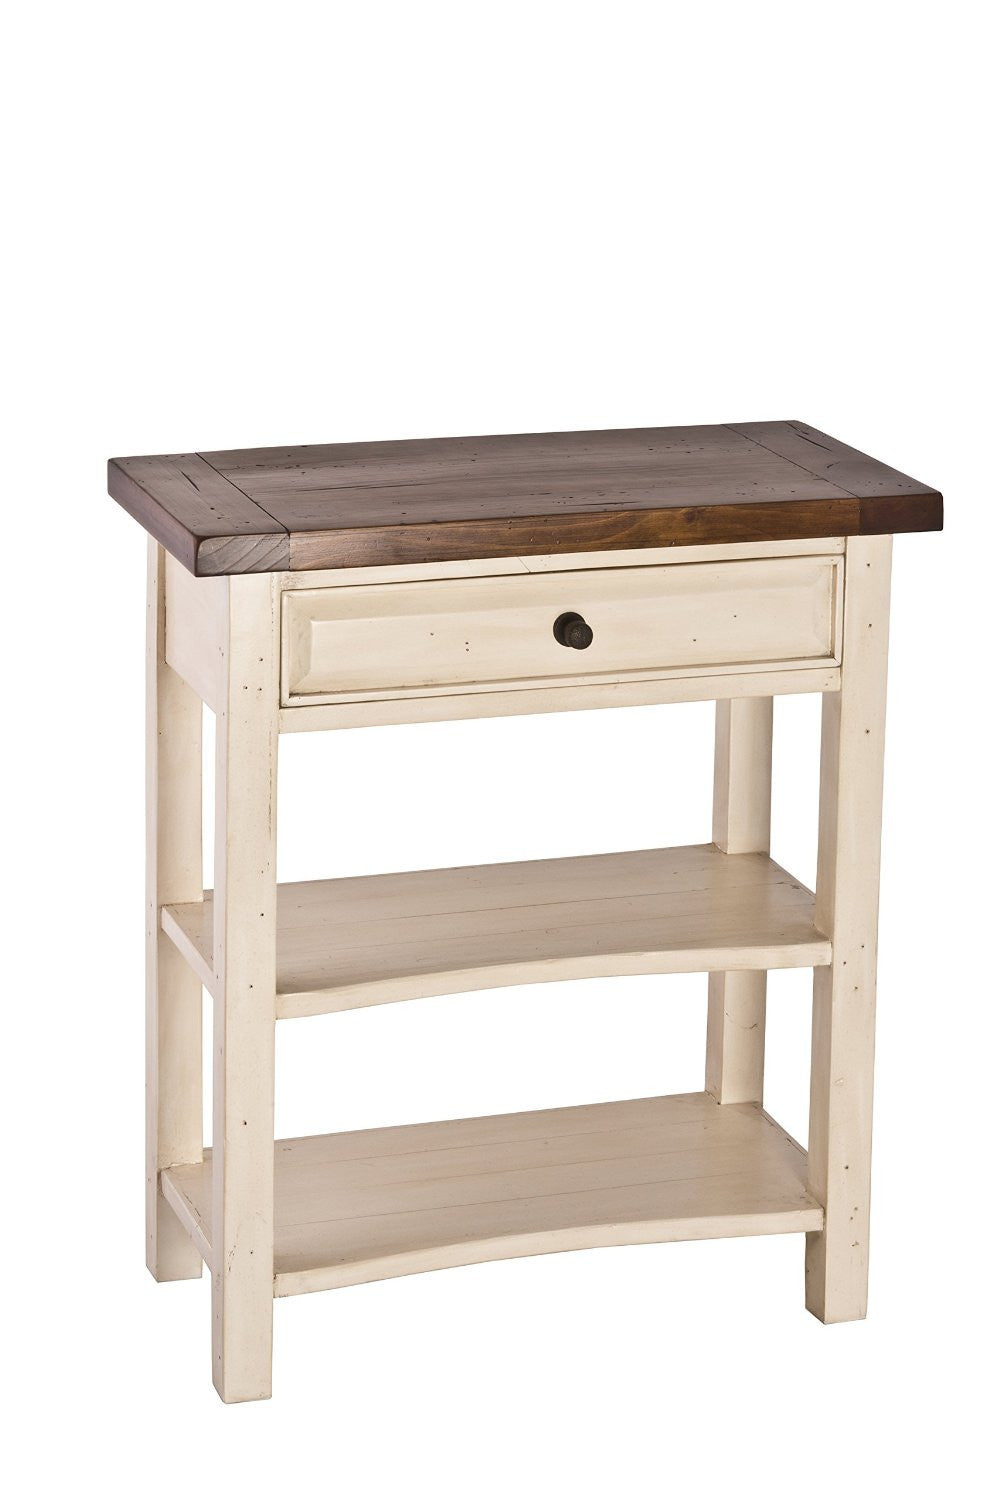 Hillsdale Furniture 5465-889w Tuscan Retreat® Single Drawer Console Table